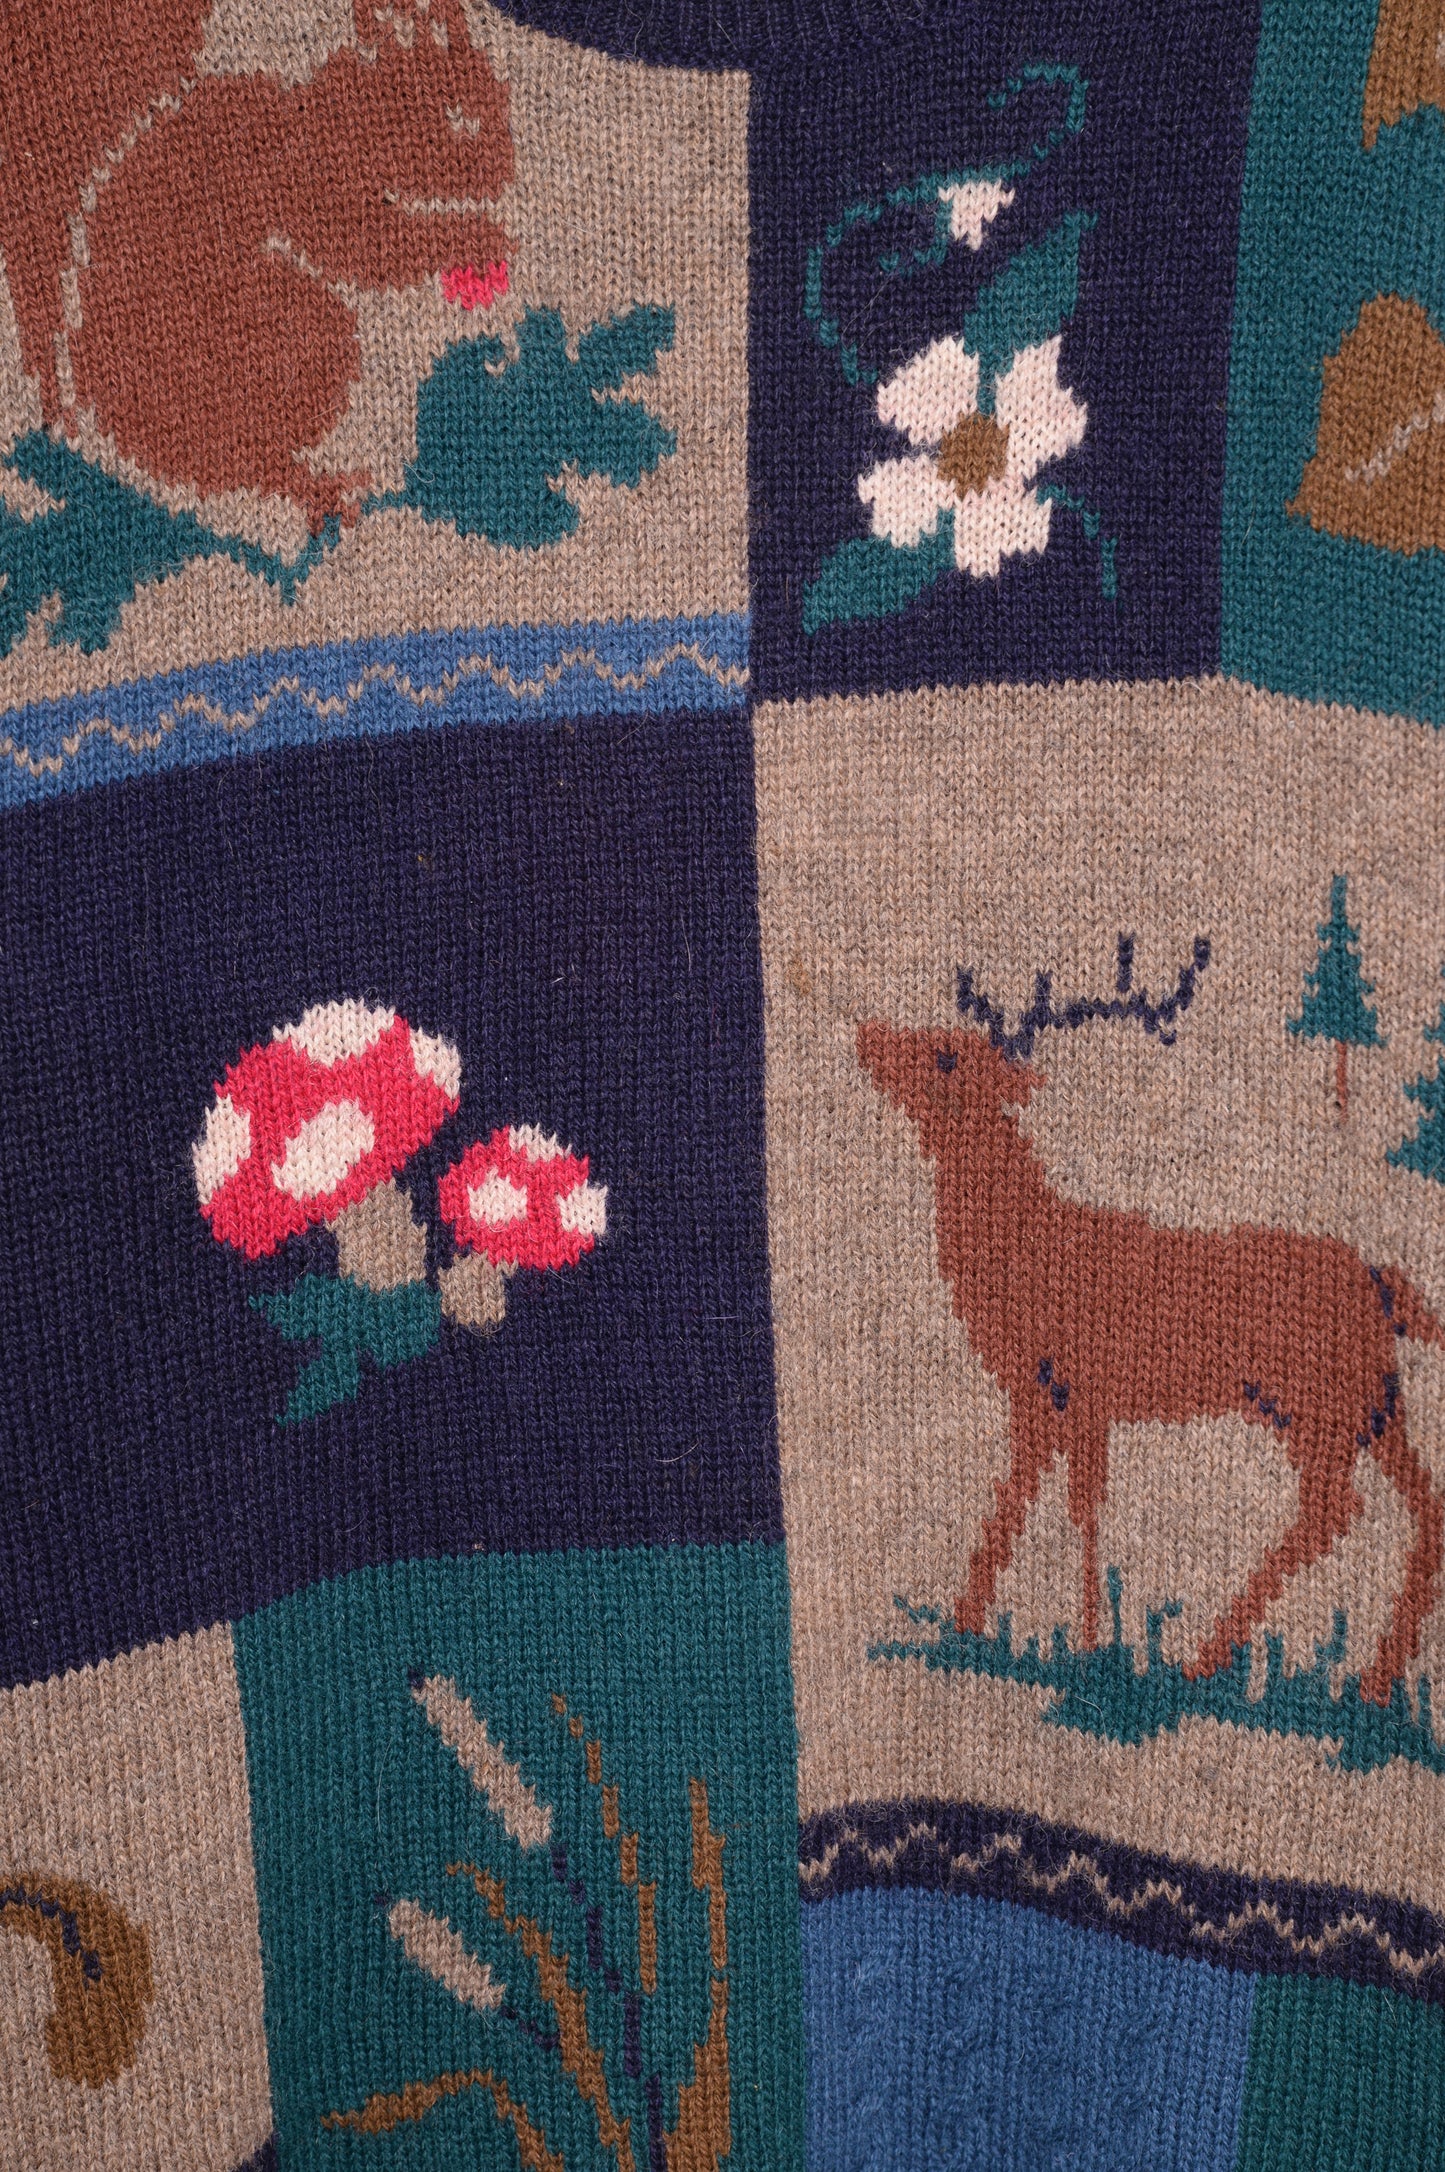 1990s Forest Animals Wool Sweater